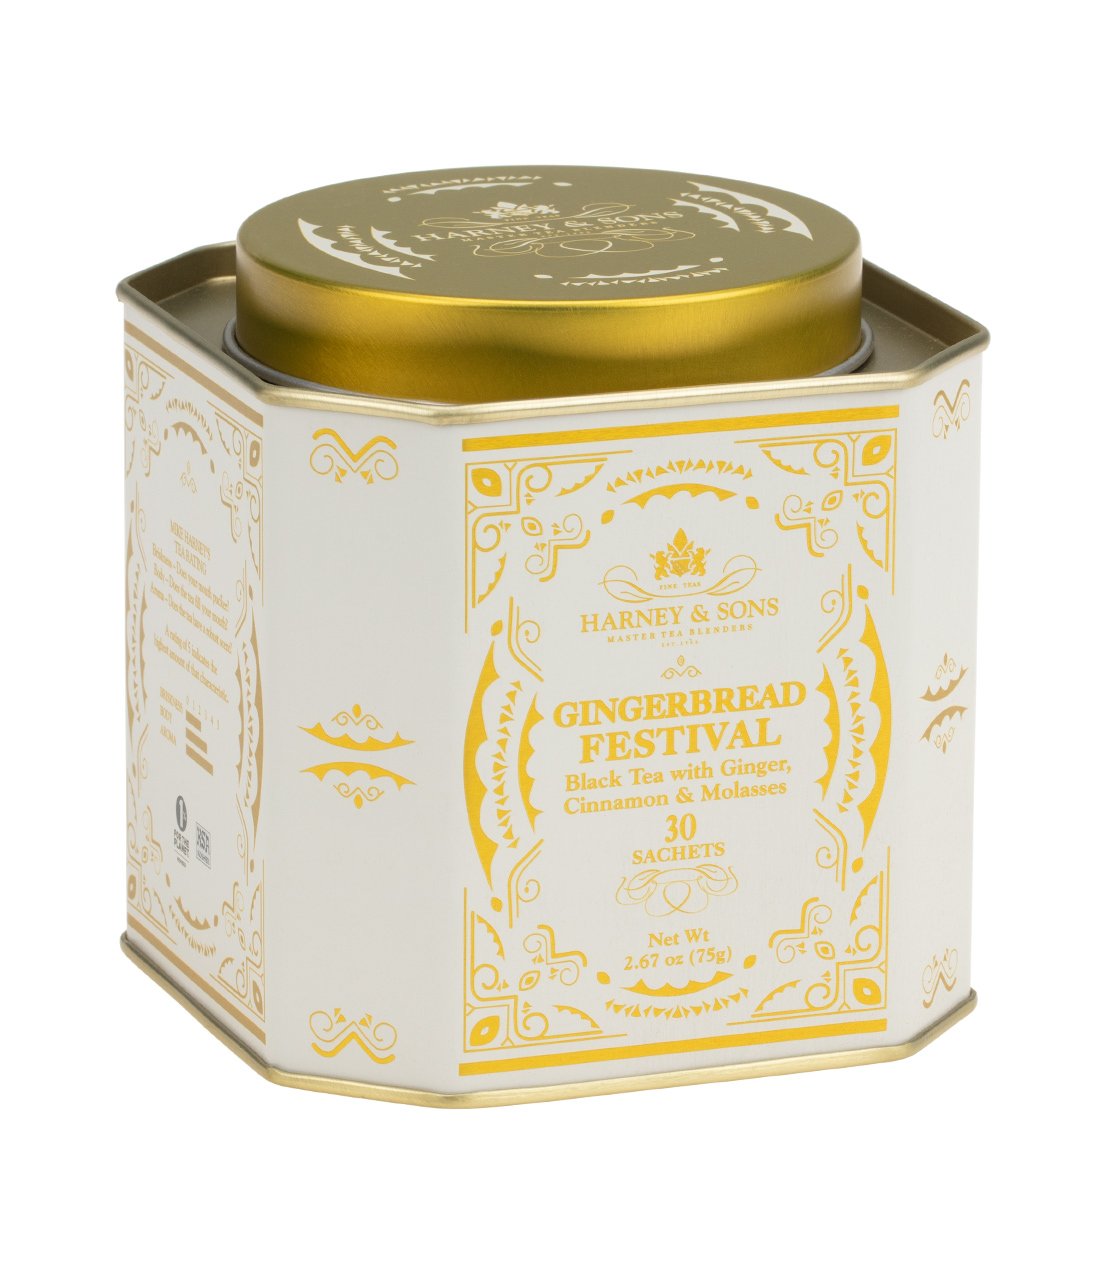 Blac tea with gingerbread flavours - Gingerbread Festival Tea, tin of 30 sachets by Harney & Sons Fine Teas Europe